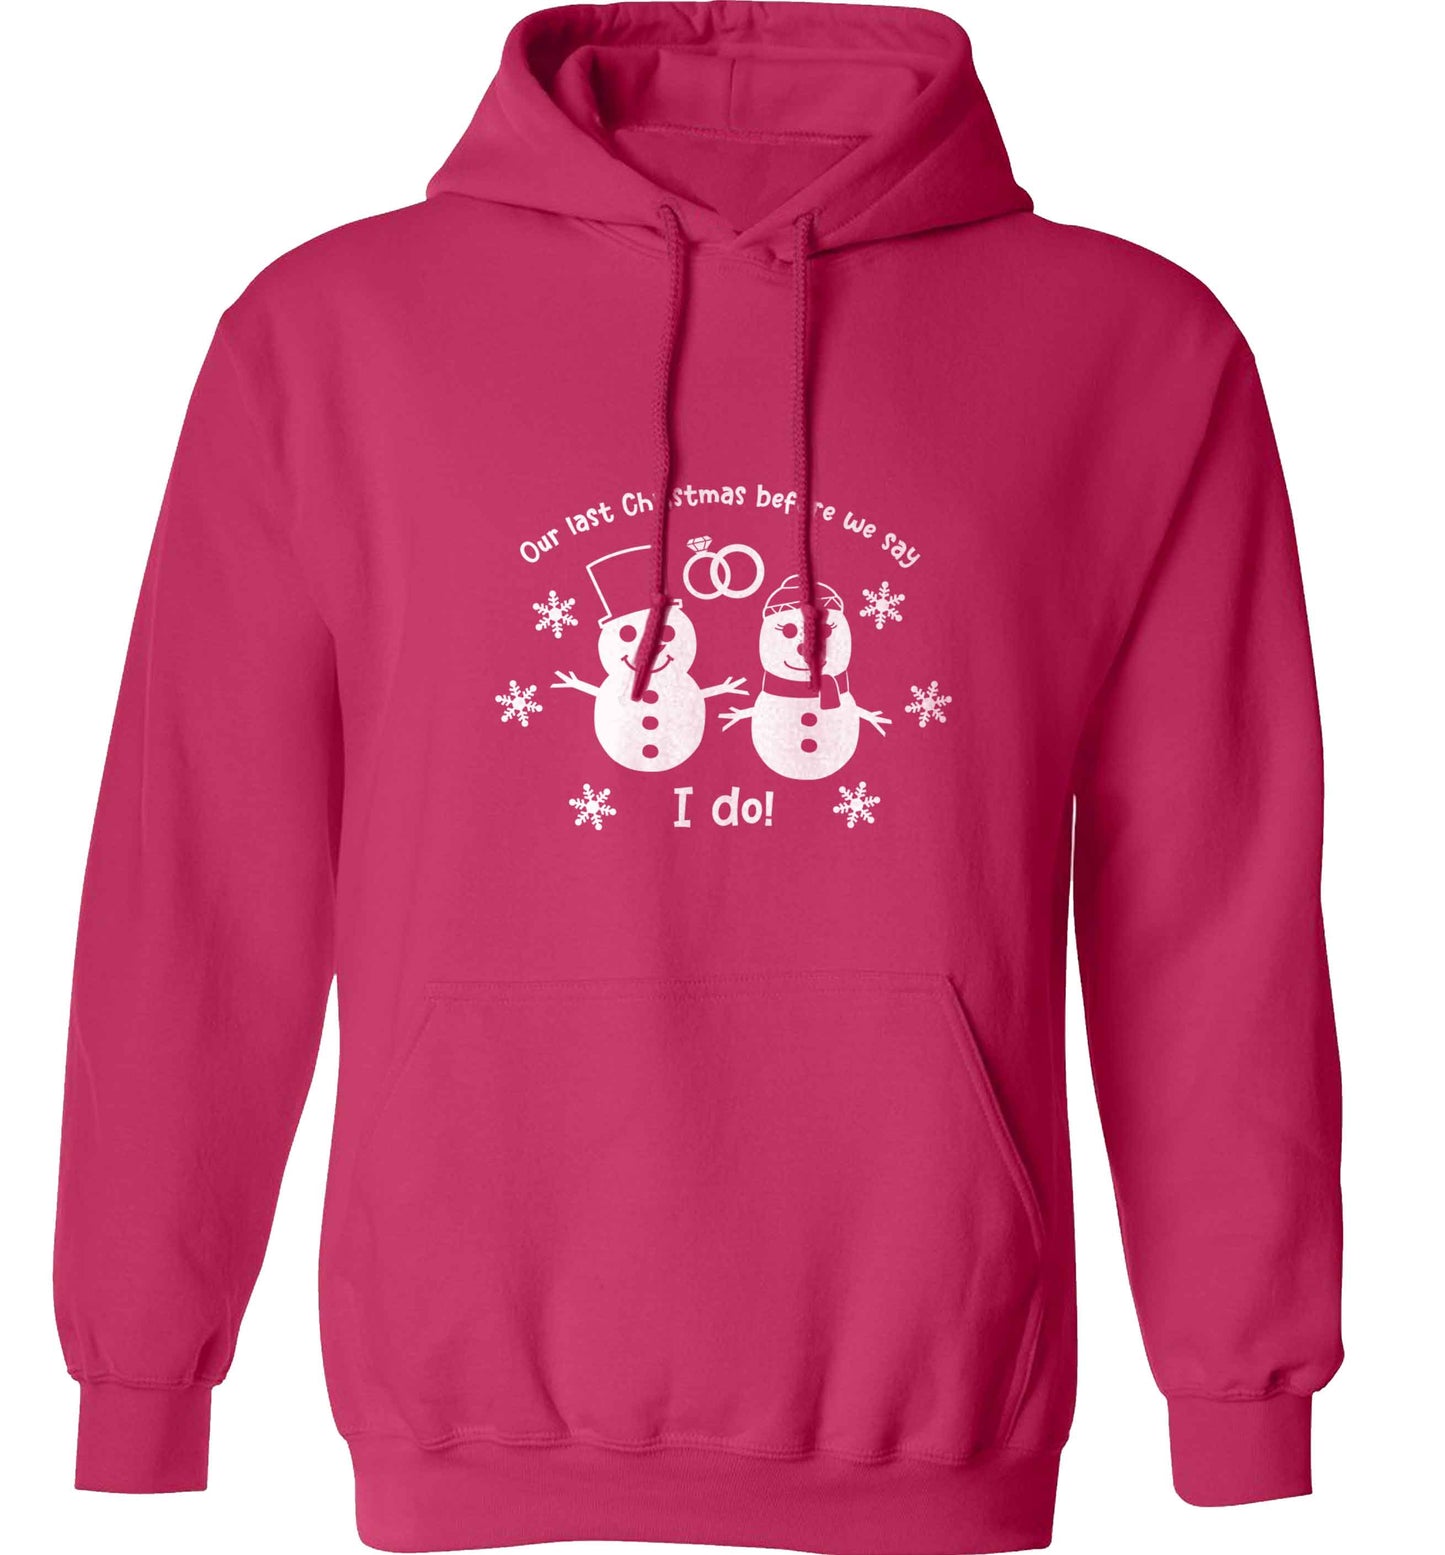 Last Christmas before we say I do adults unisex pink hoodie 2XL